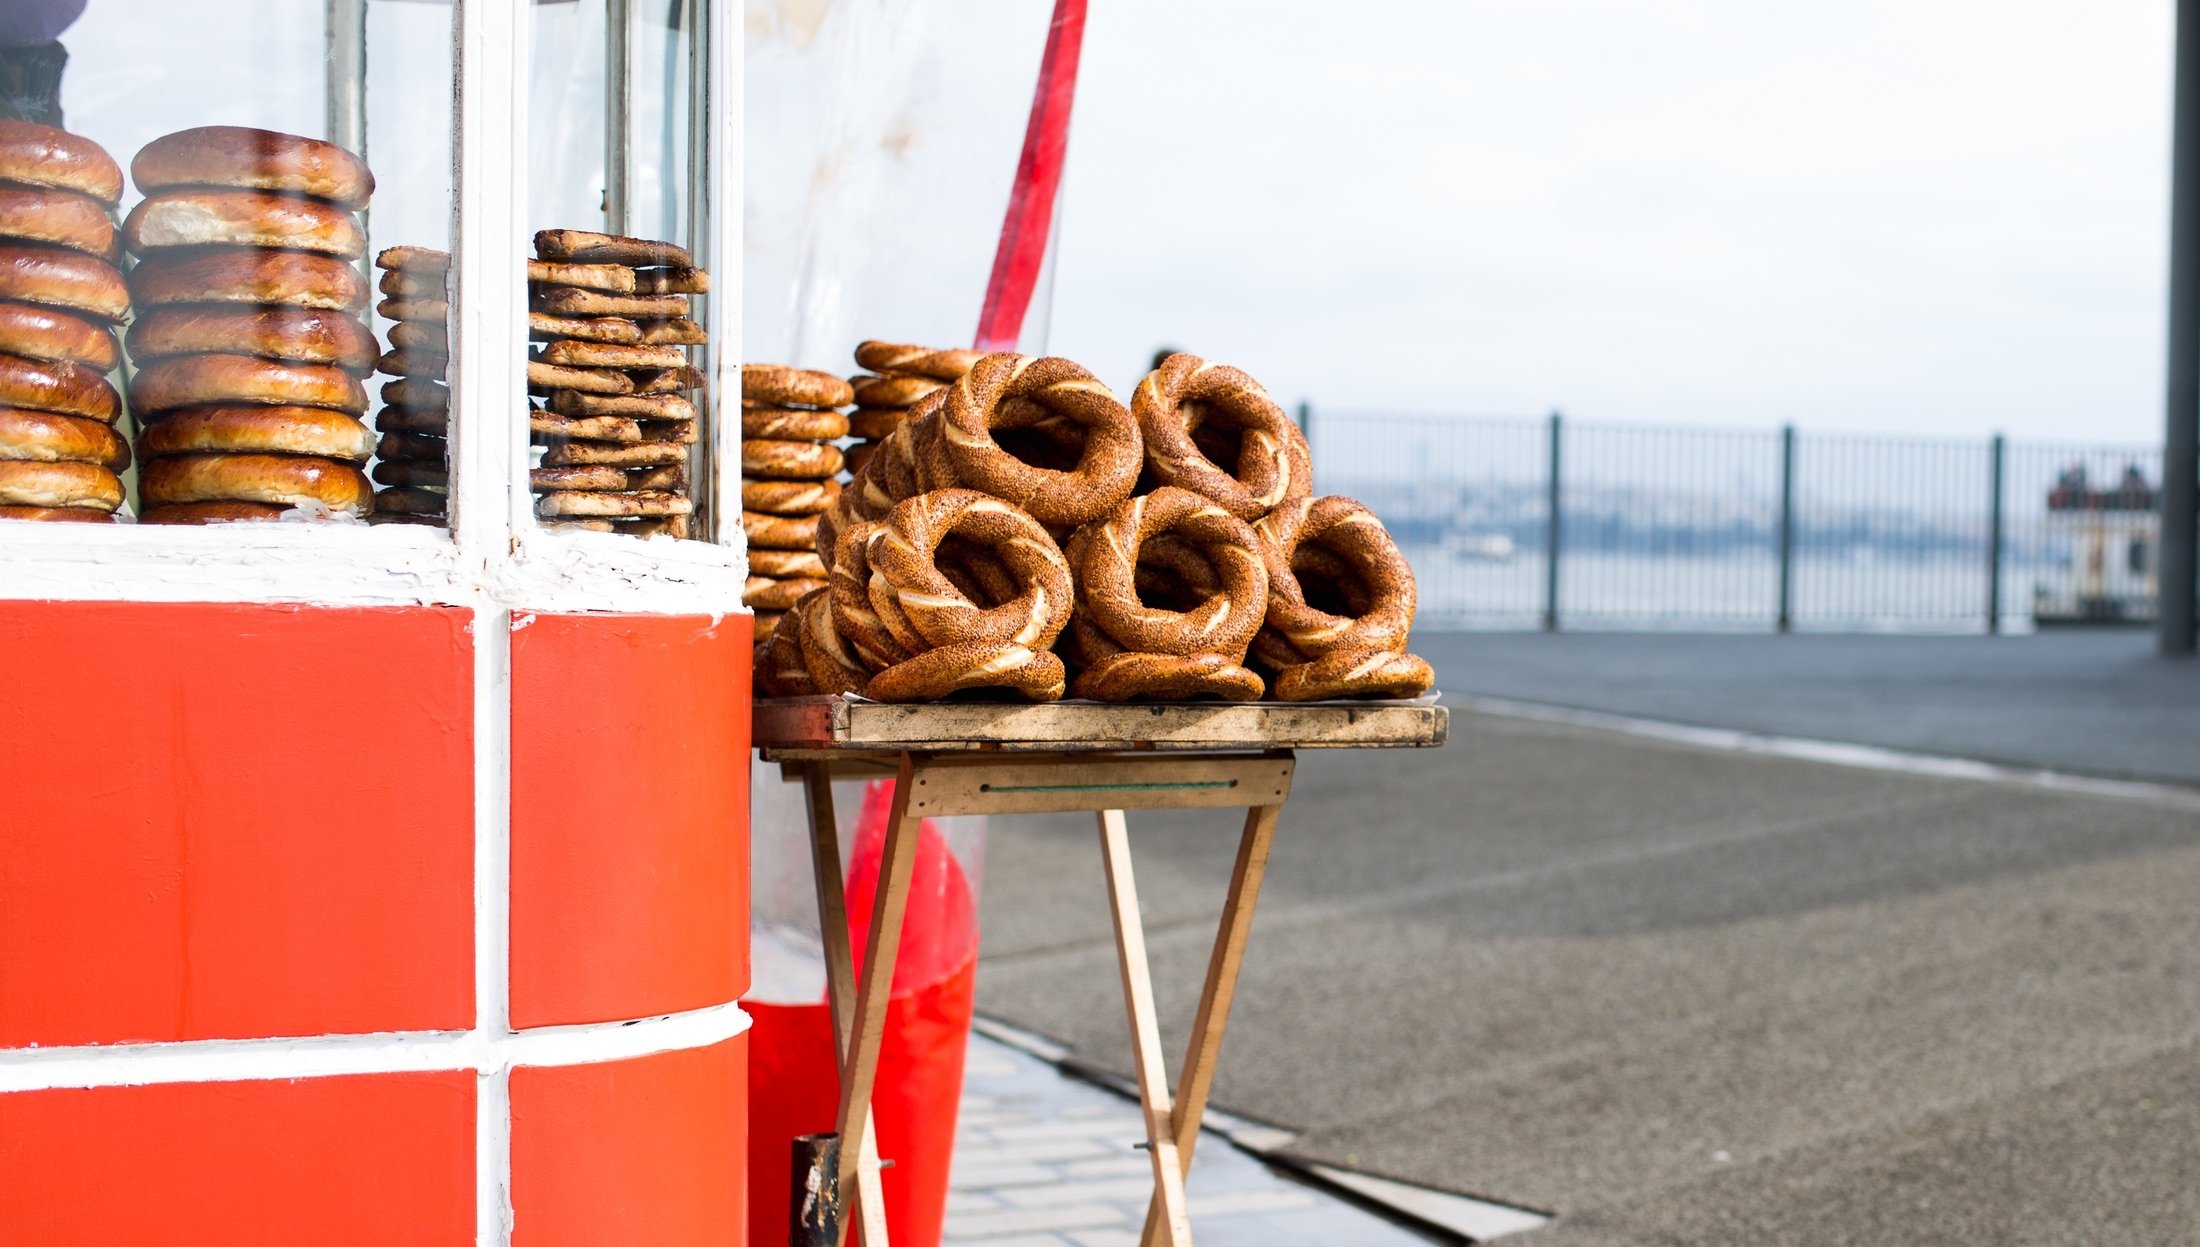 You should not leave Istanbul without getting on the ferry and watching the magnificent view of Istanbul as it drifts past with tea, simit and seagulls. (Shutterstock Photo)